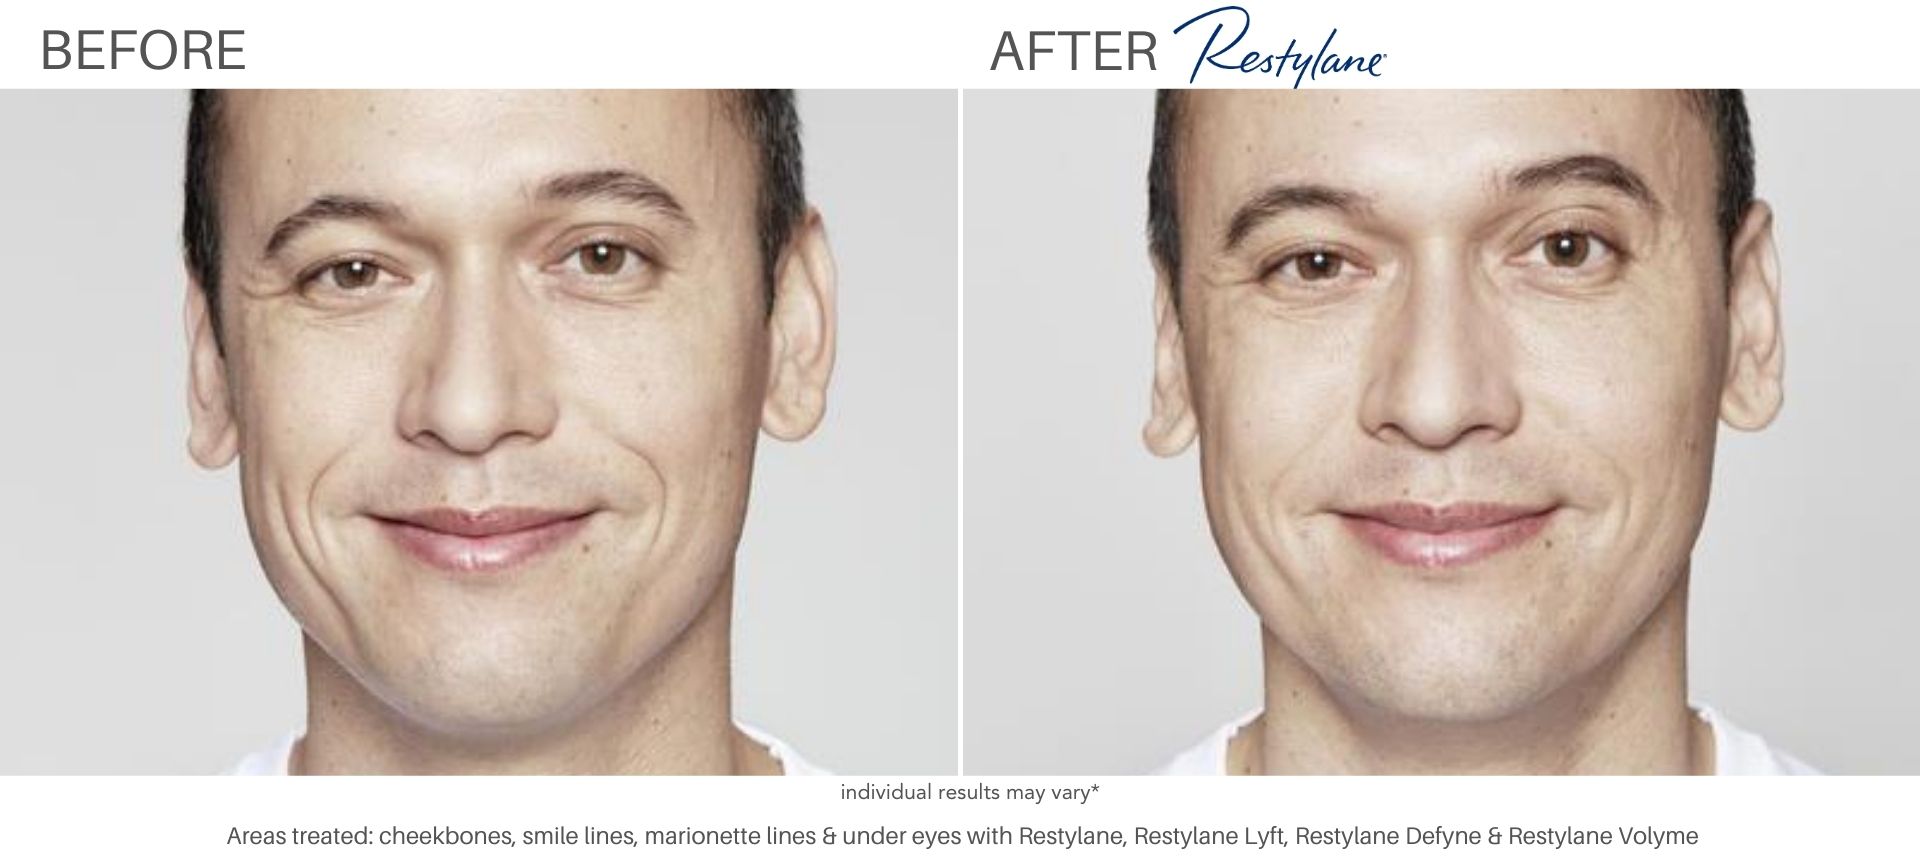 Man's before and after results from Juvederm.